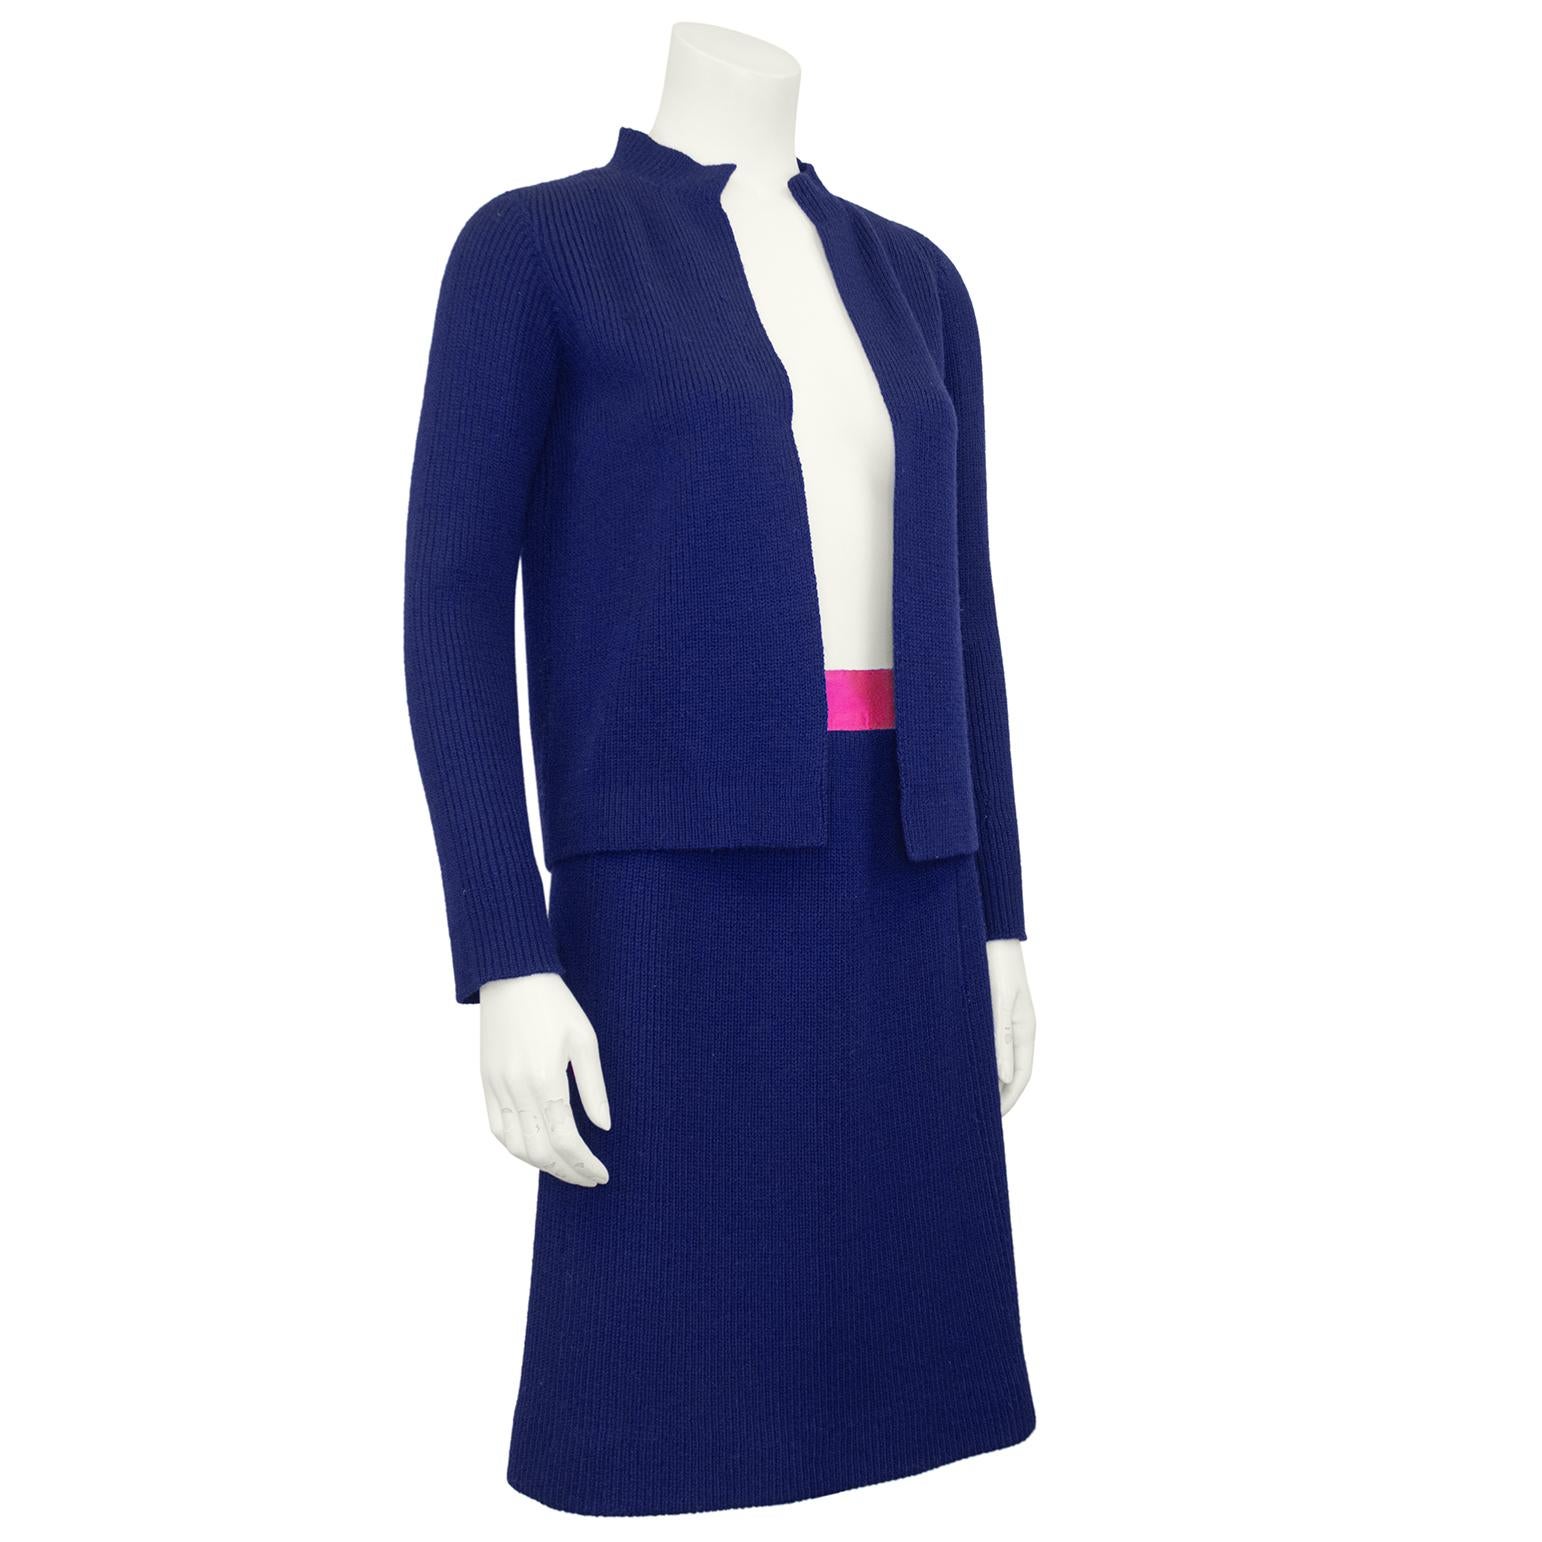 Unique vintage Chanel Haute Couture navy blue wool ribbed knit cardigan and skirt set. Very simple, high neck cardigan that sits open. The interior hem of the cardigan has a navy blue grosgrain ribbon trim to add some weight, so it hangs just right.